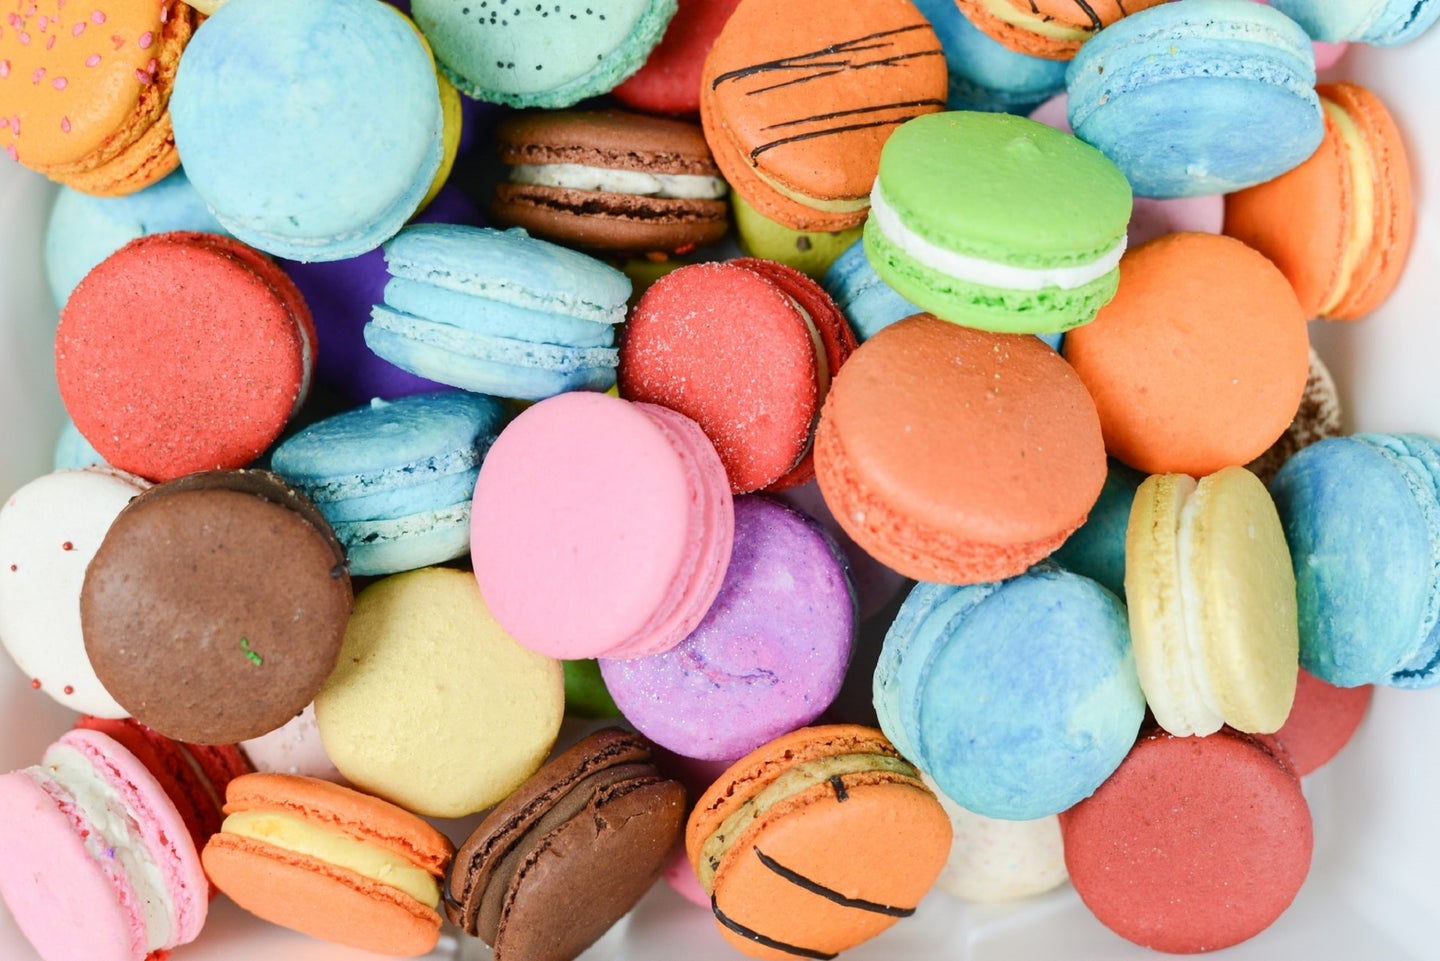 Macaron cookies with bright food dyes like orange, light blue, and pastel yellow